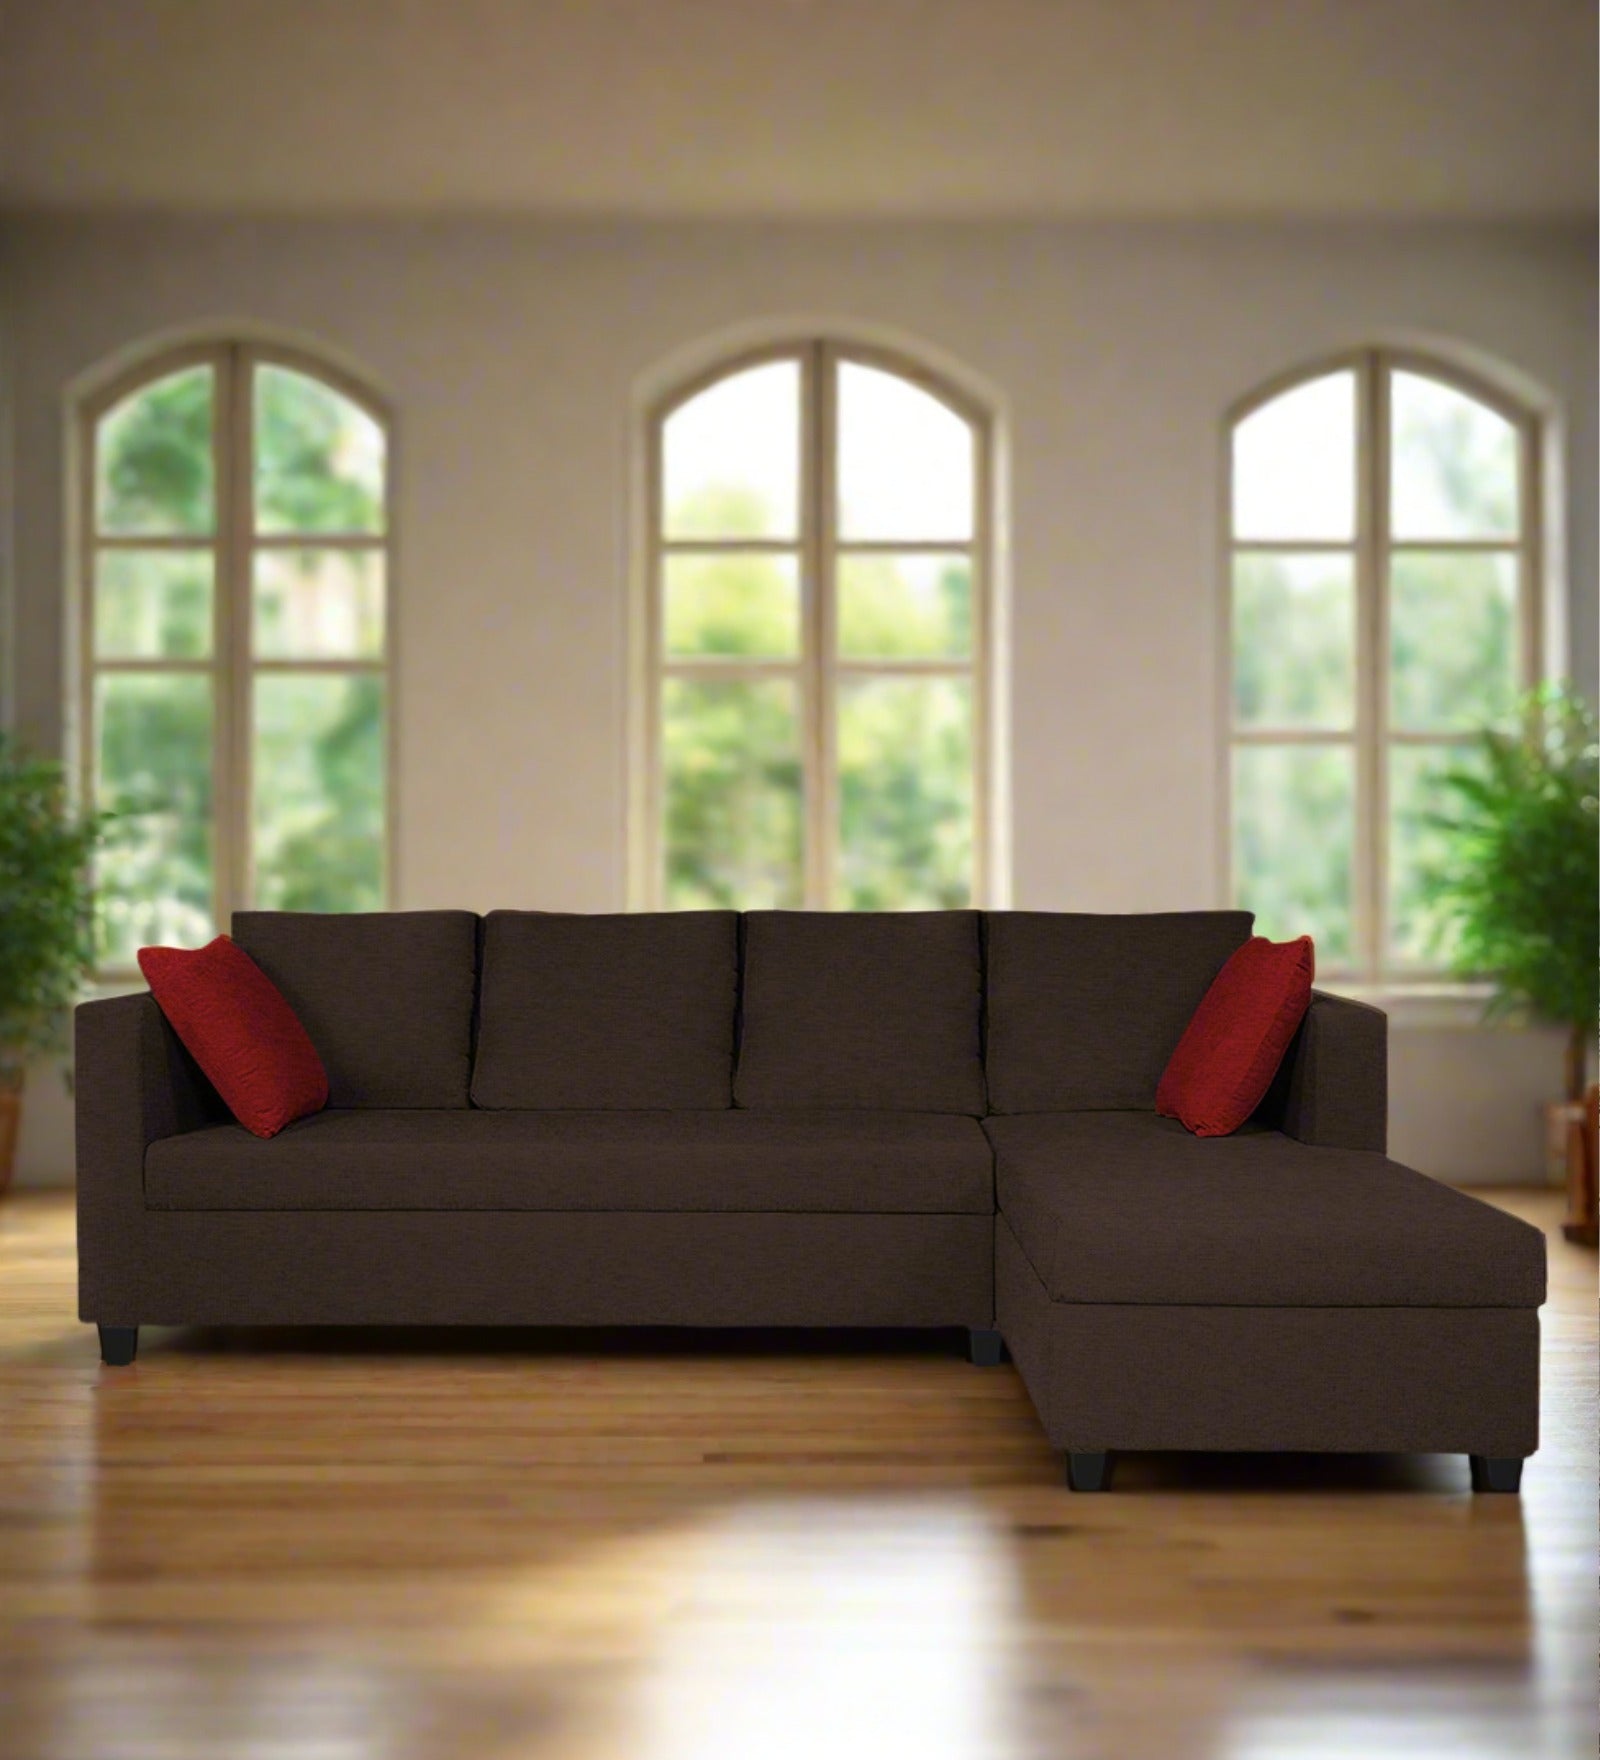 Nebula Fabric LHS Sectional Sofa (3+Lounger) in Coffee Brown Colour